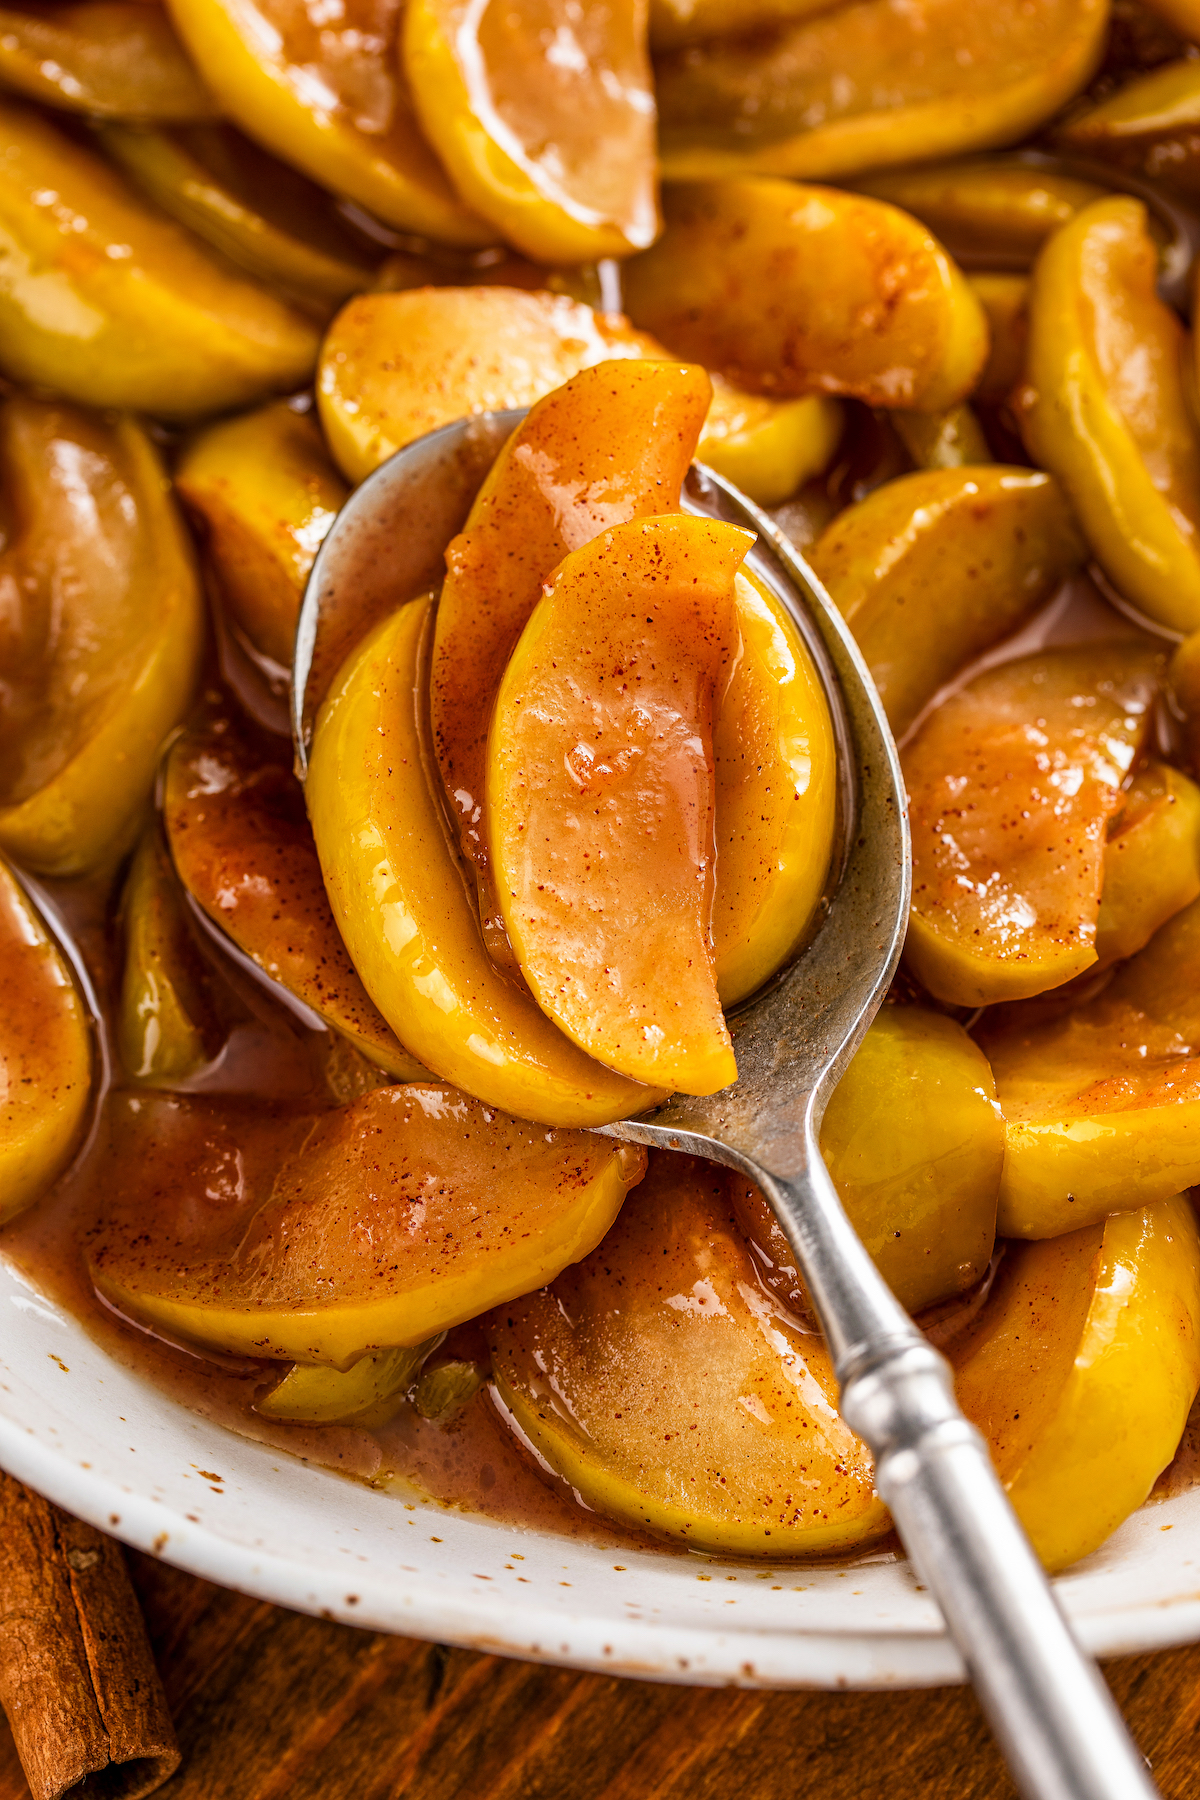 A spoonful of tender fried apples in a sweet cinnamon and brown sugar syrup being lifted out of a bowl.